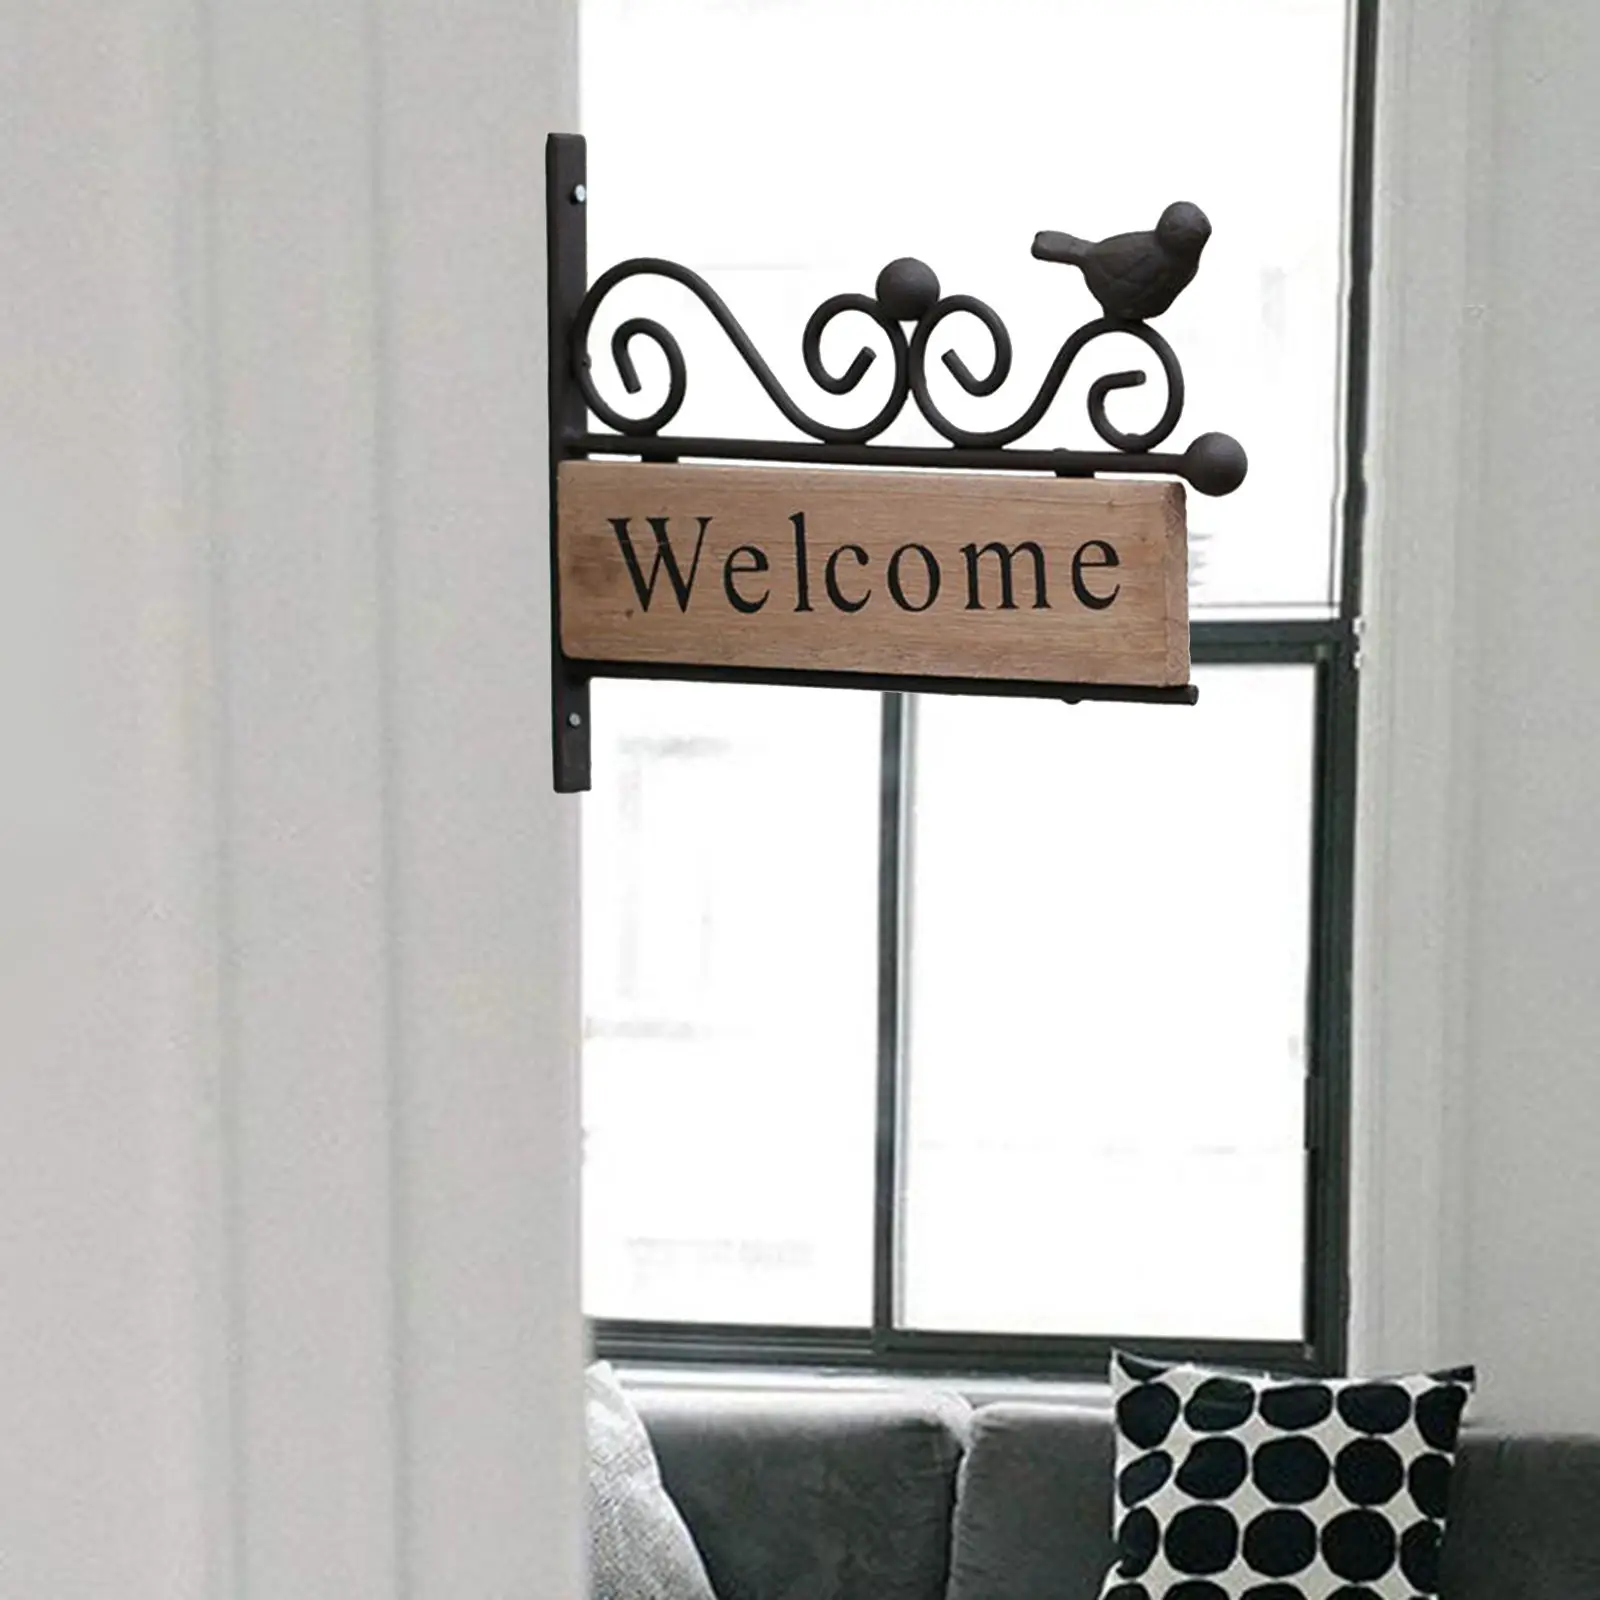 1pc Welcome Sign Board Iron Art Wooden Hanging Pendant Rural Style Bird Pattern Door Hanging Decoration For Home Office Party